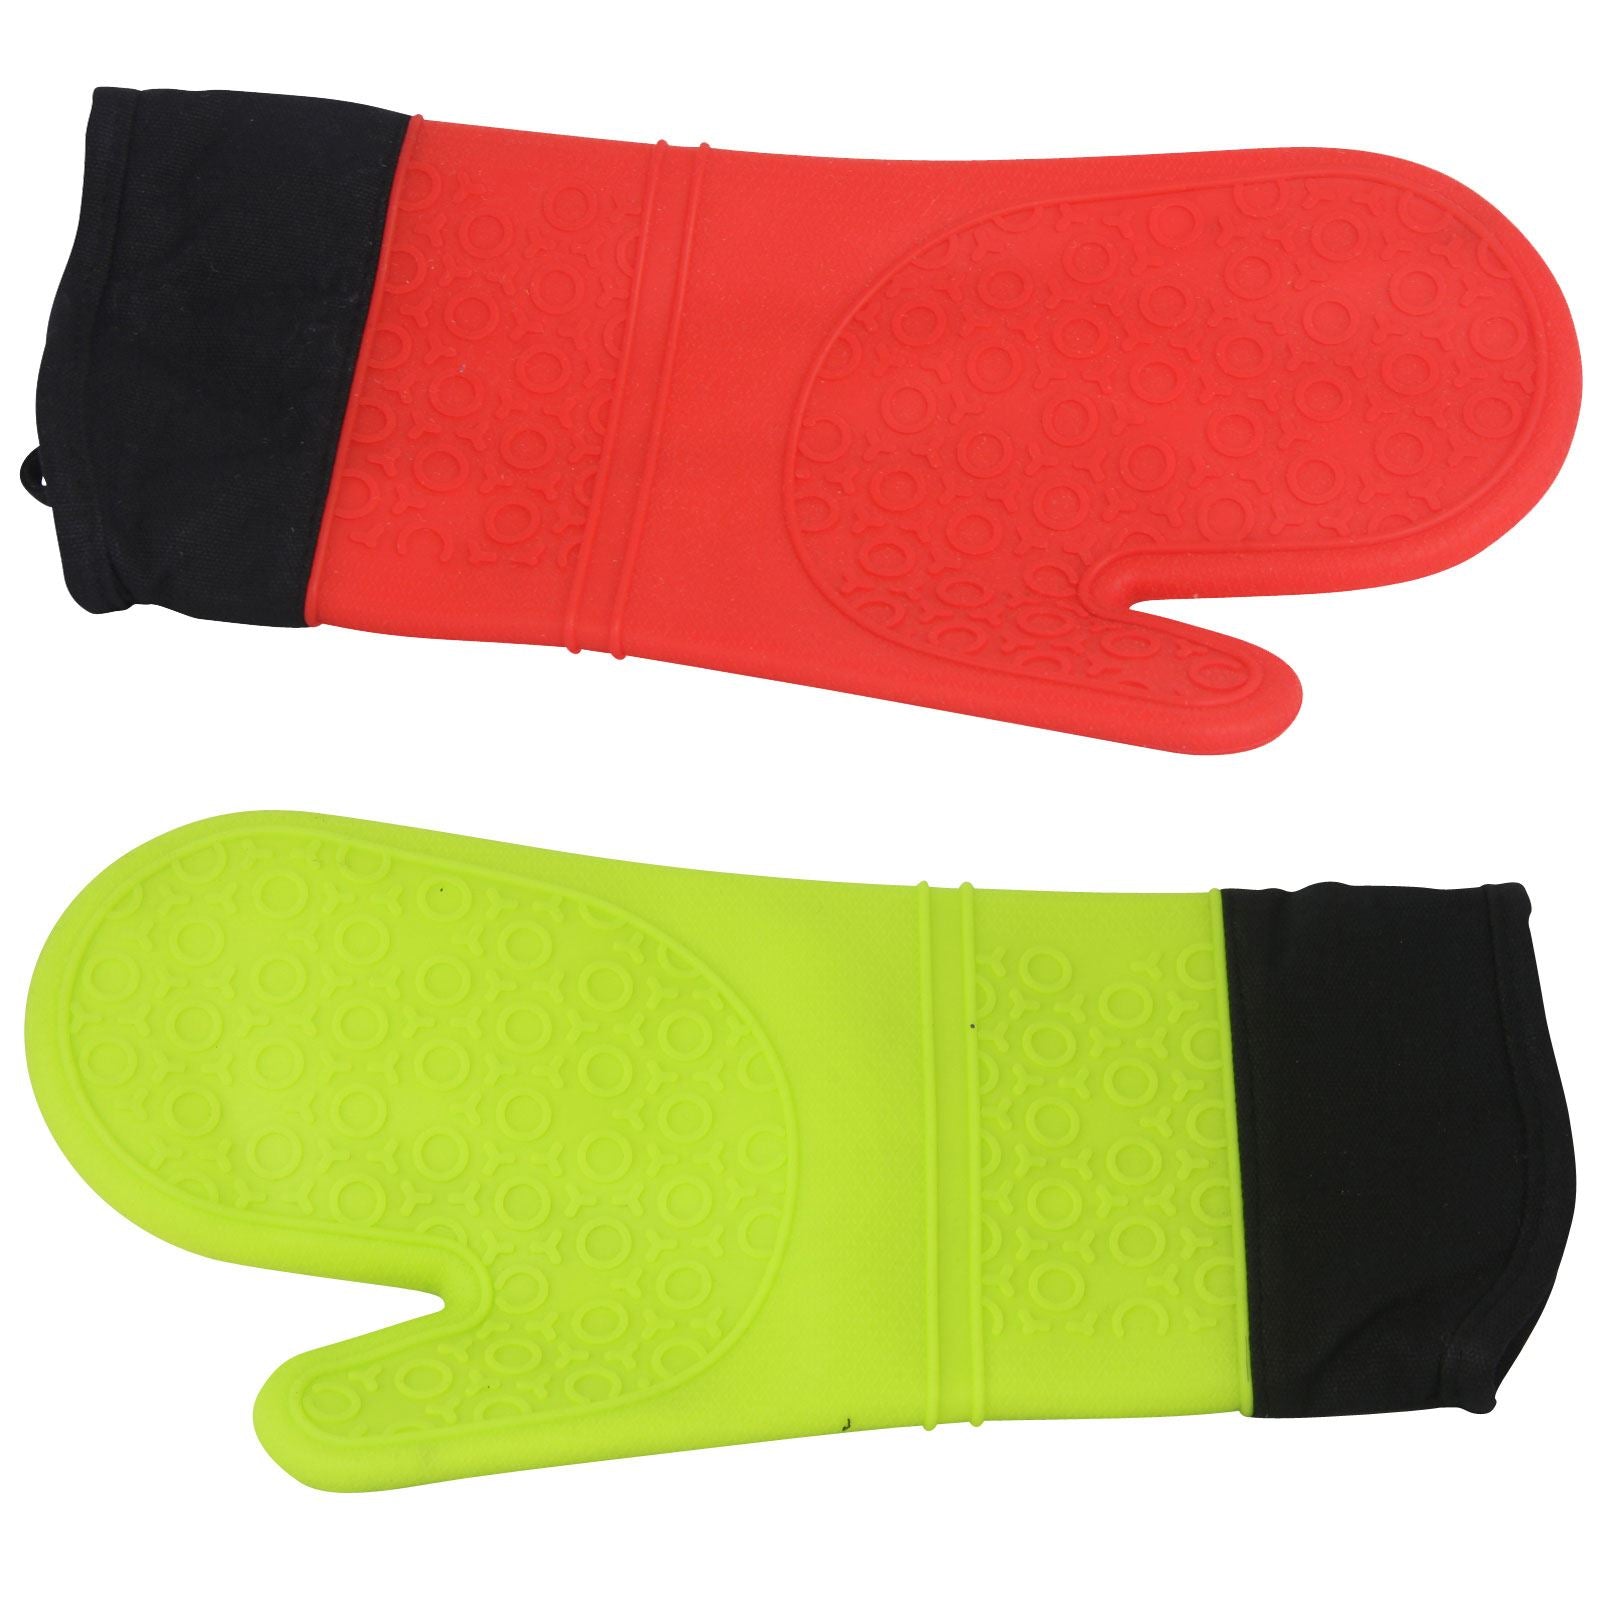 Deluxe Heat Resistant Silicon Oven Mitts With Lining